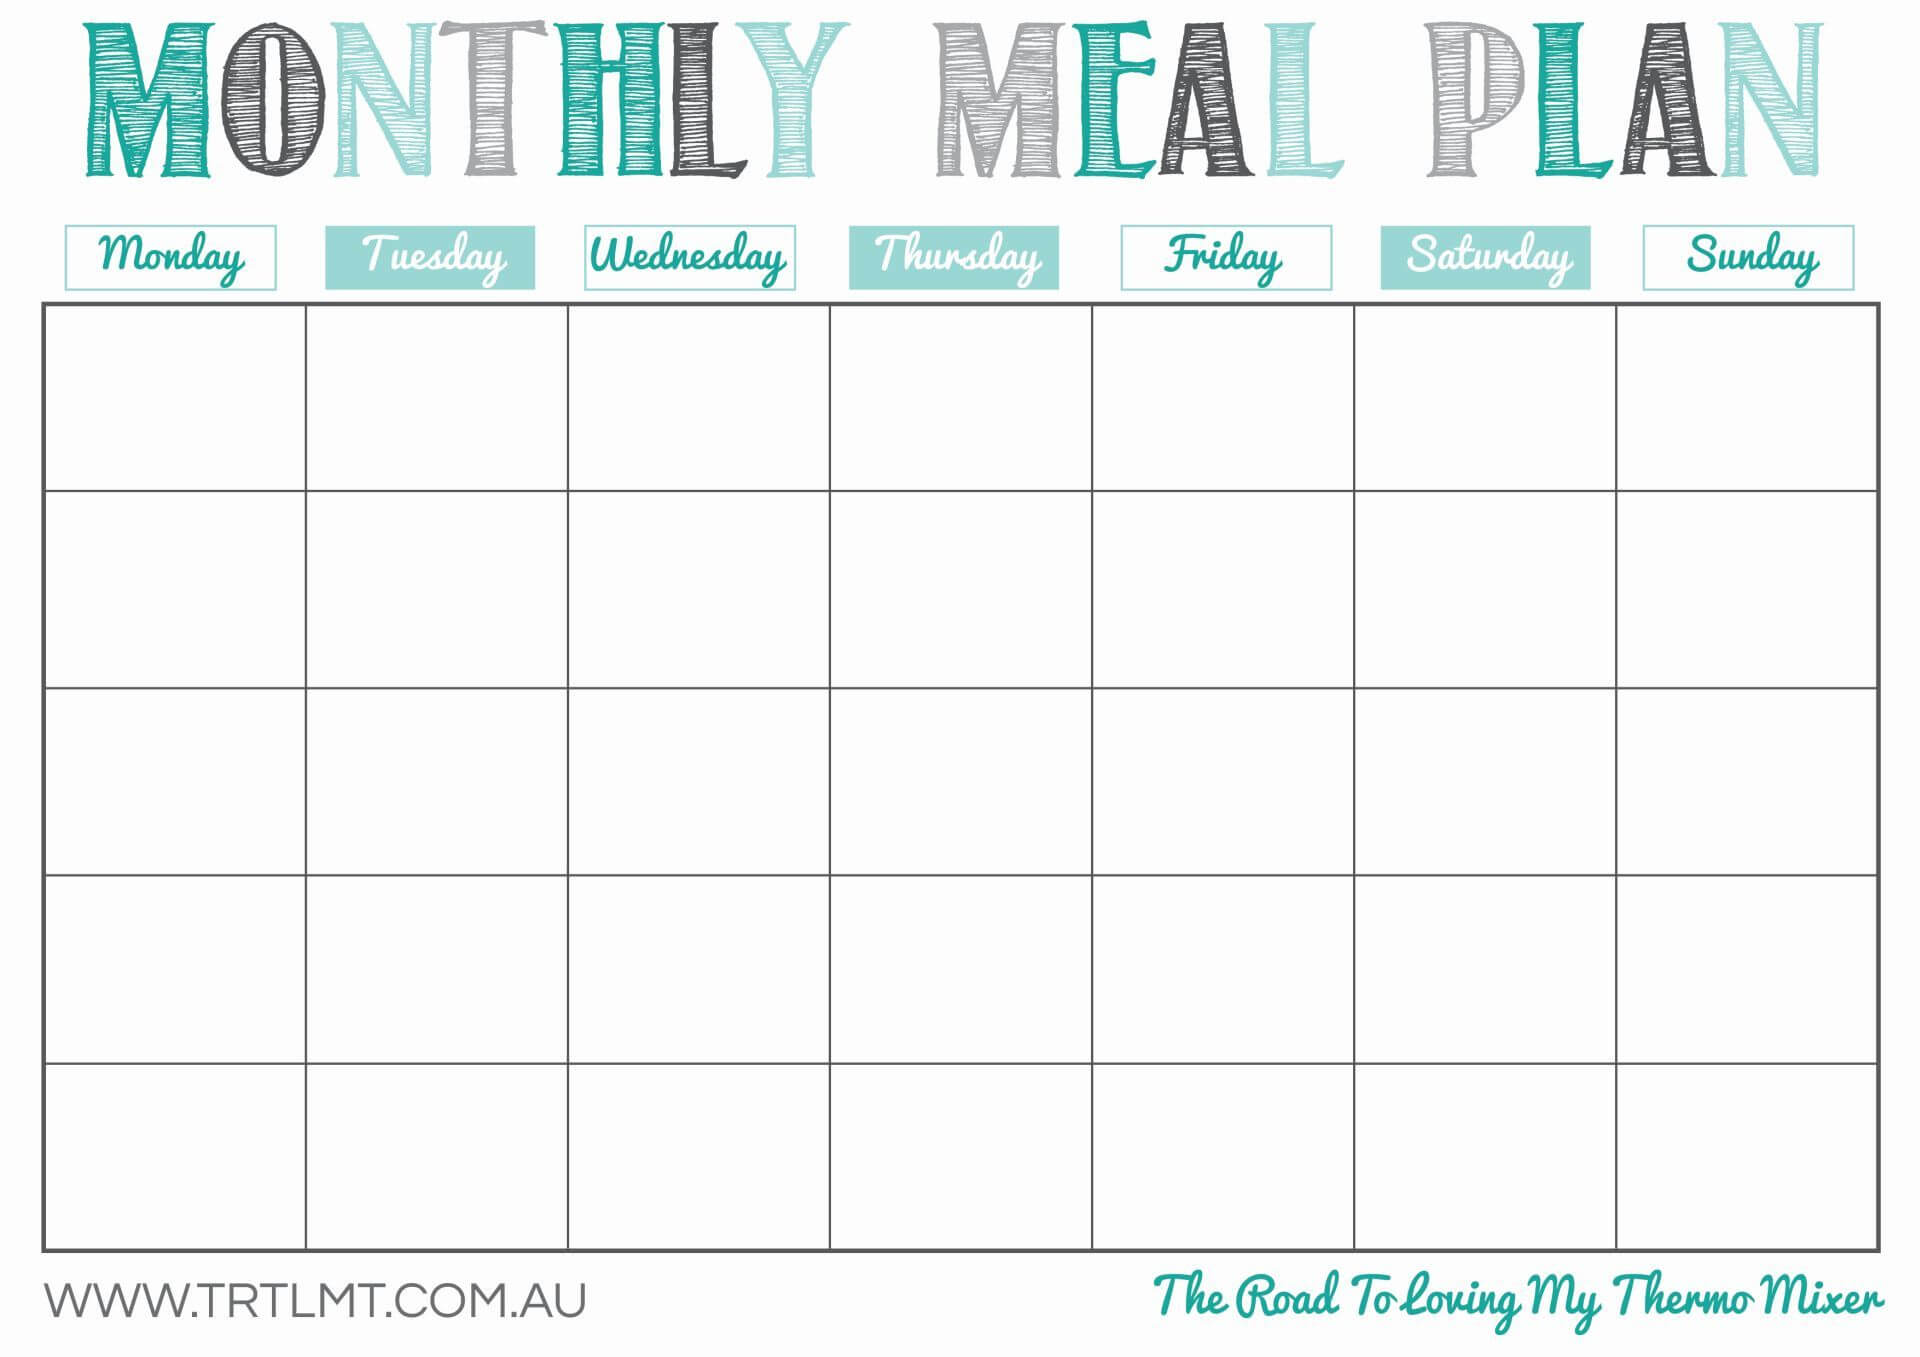 030 Monthly Meal Planner Template Free Menu Awesome Ideas Inside Meal Plan Template Word